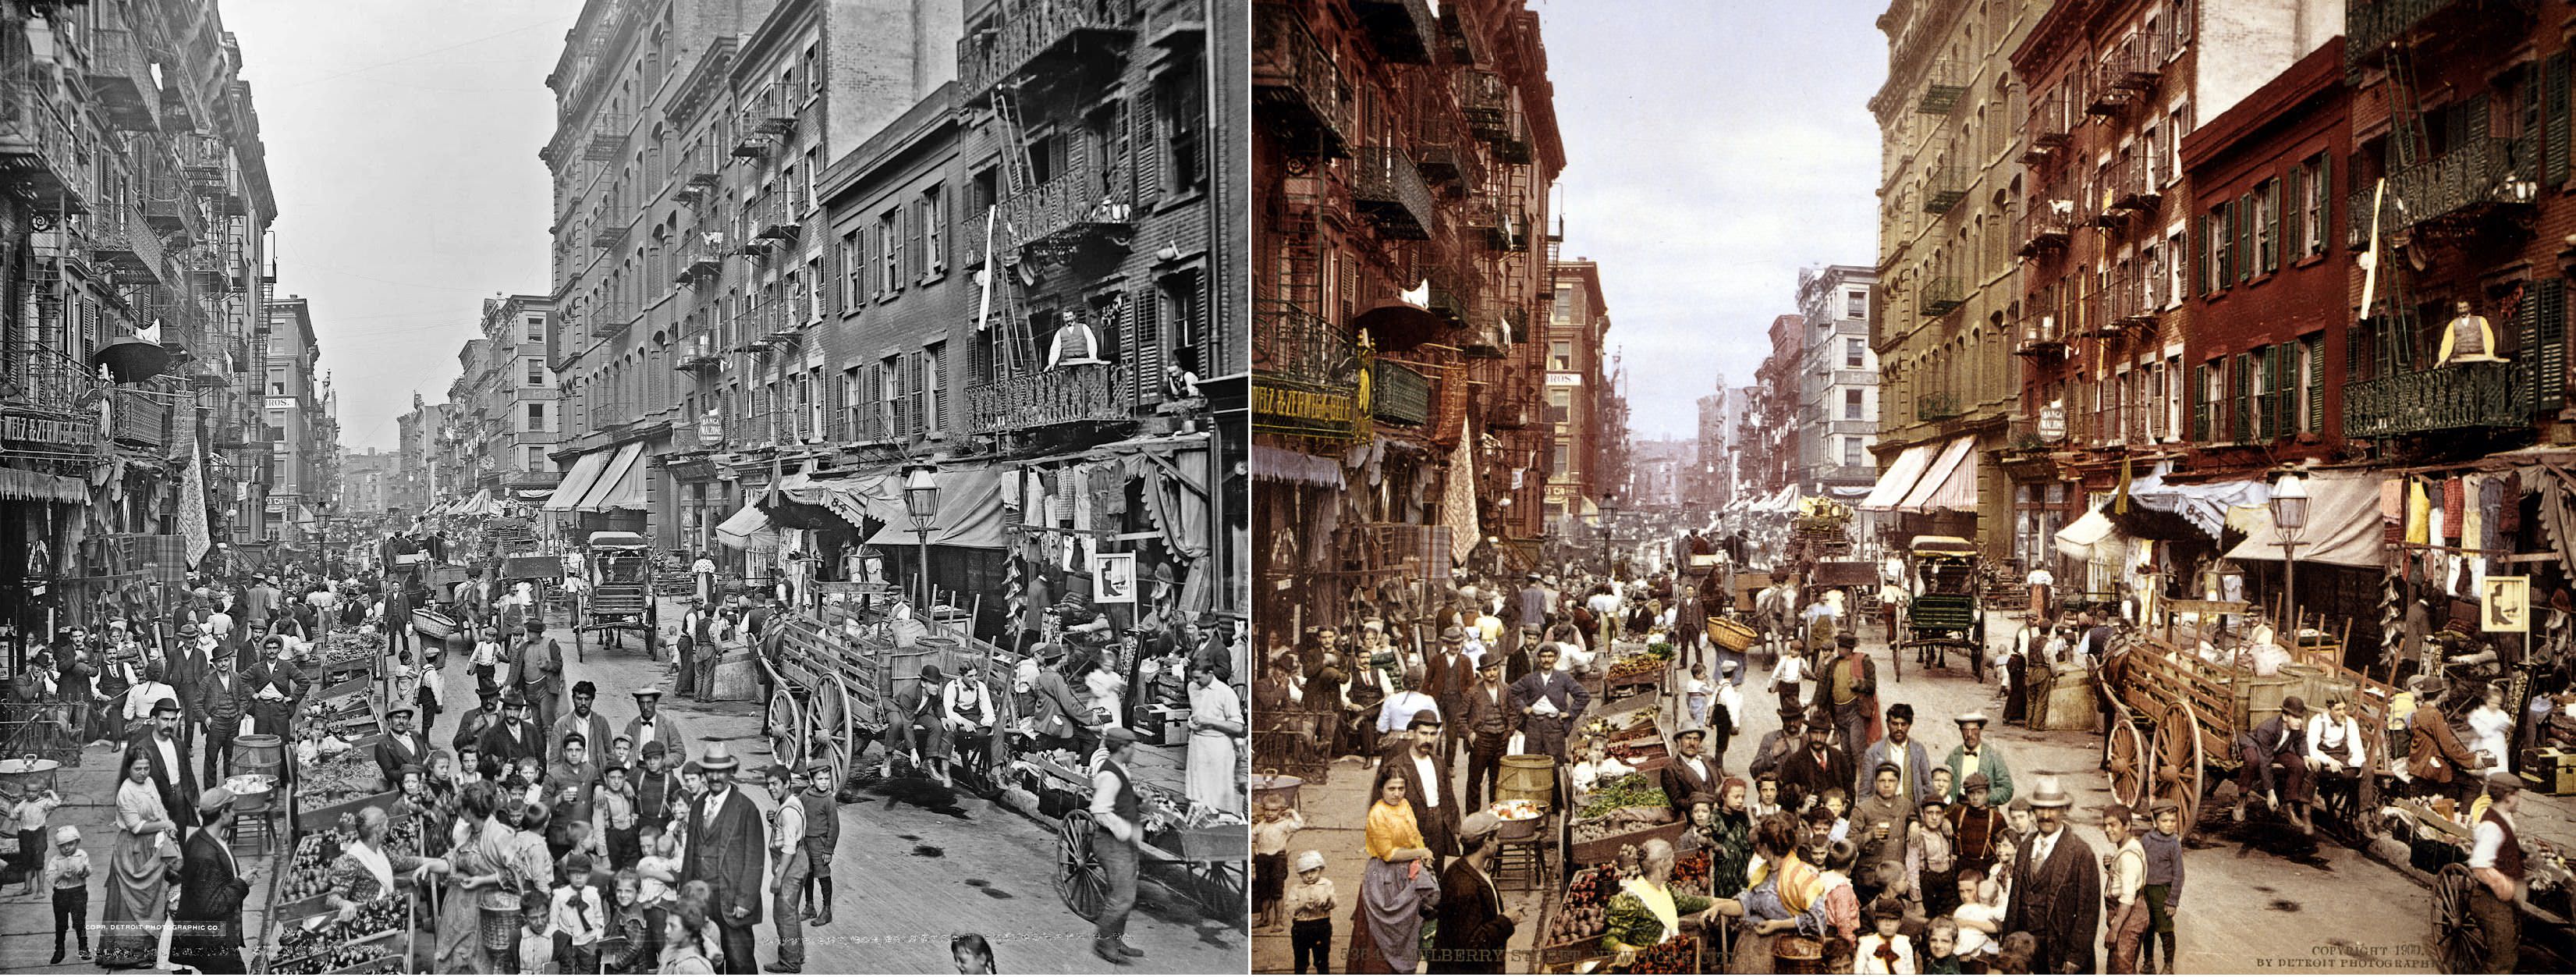 Mulburry Street in NYC, US in 1900.